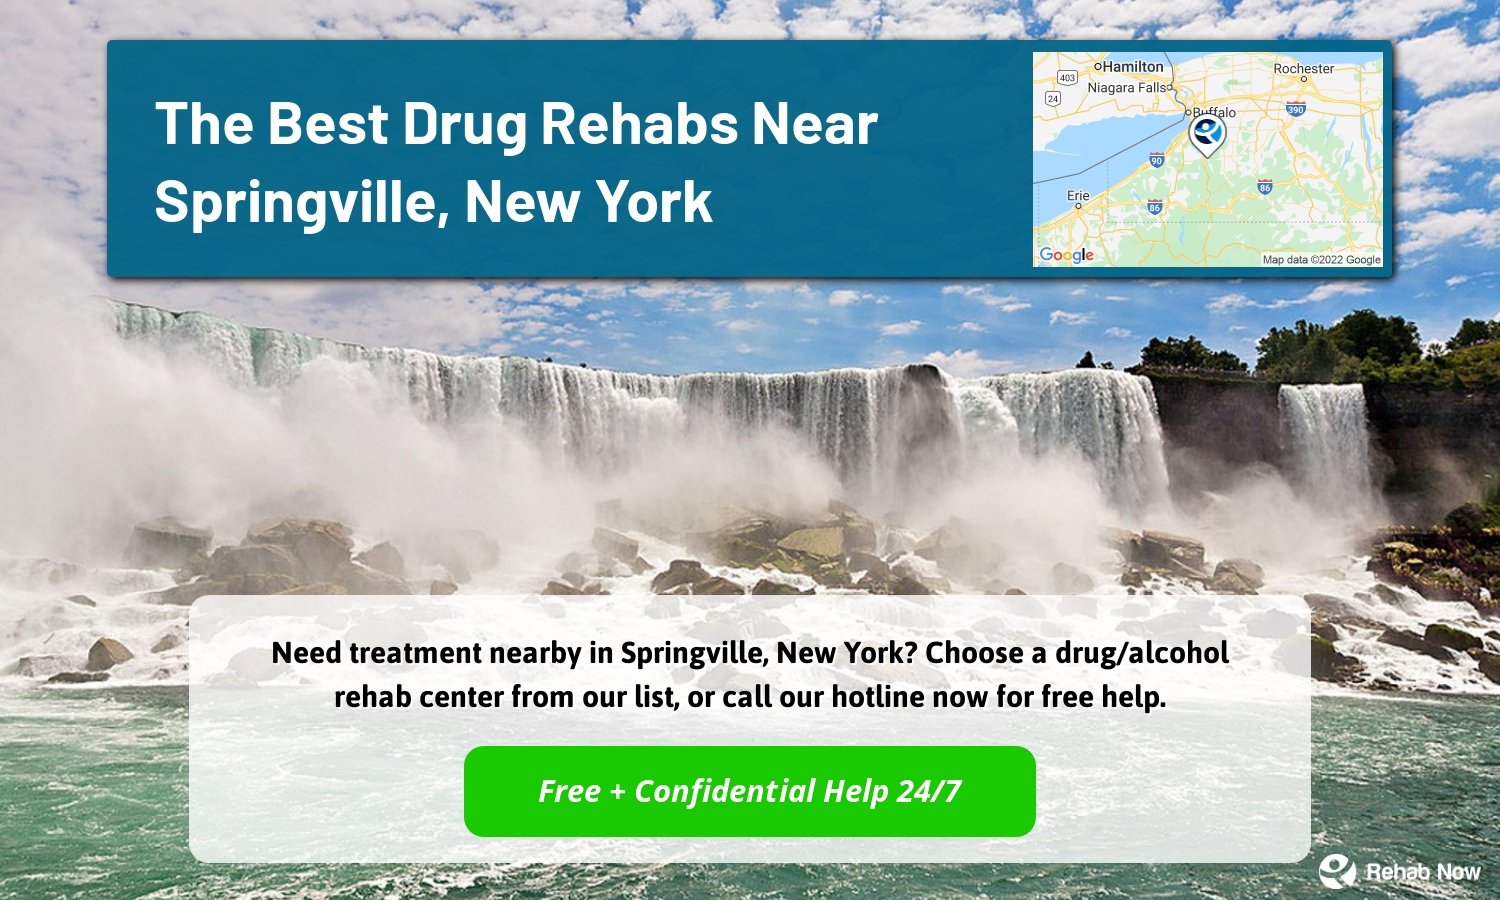 Need treatment nearby in Springville, New York? Choose a drug/alcohol rehab center from our list, or call our hotline now for free help.